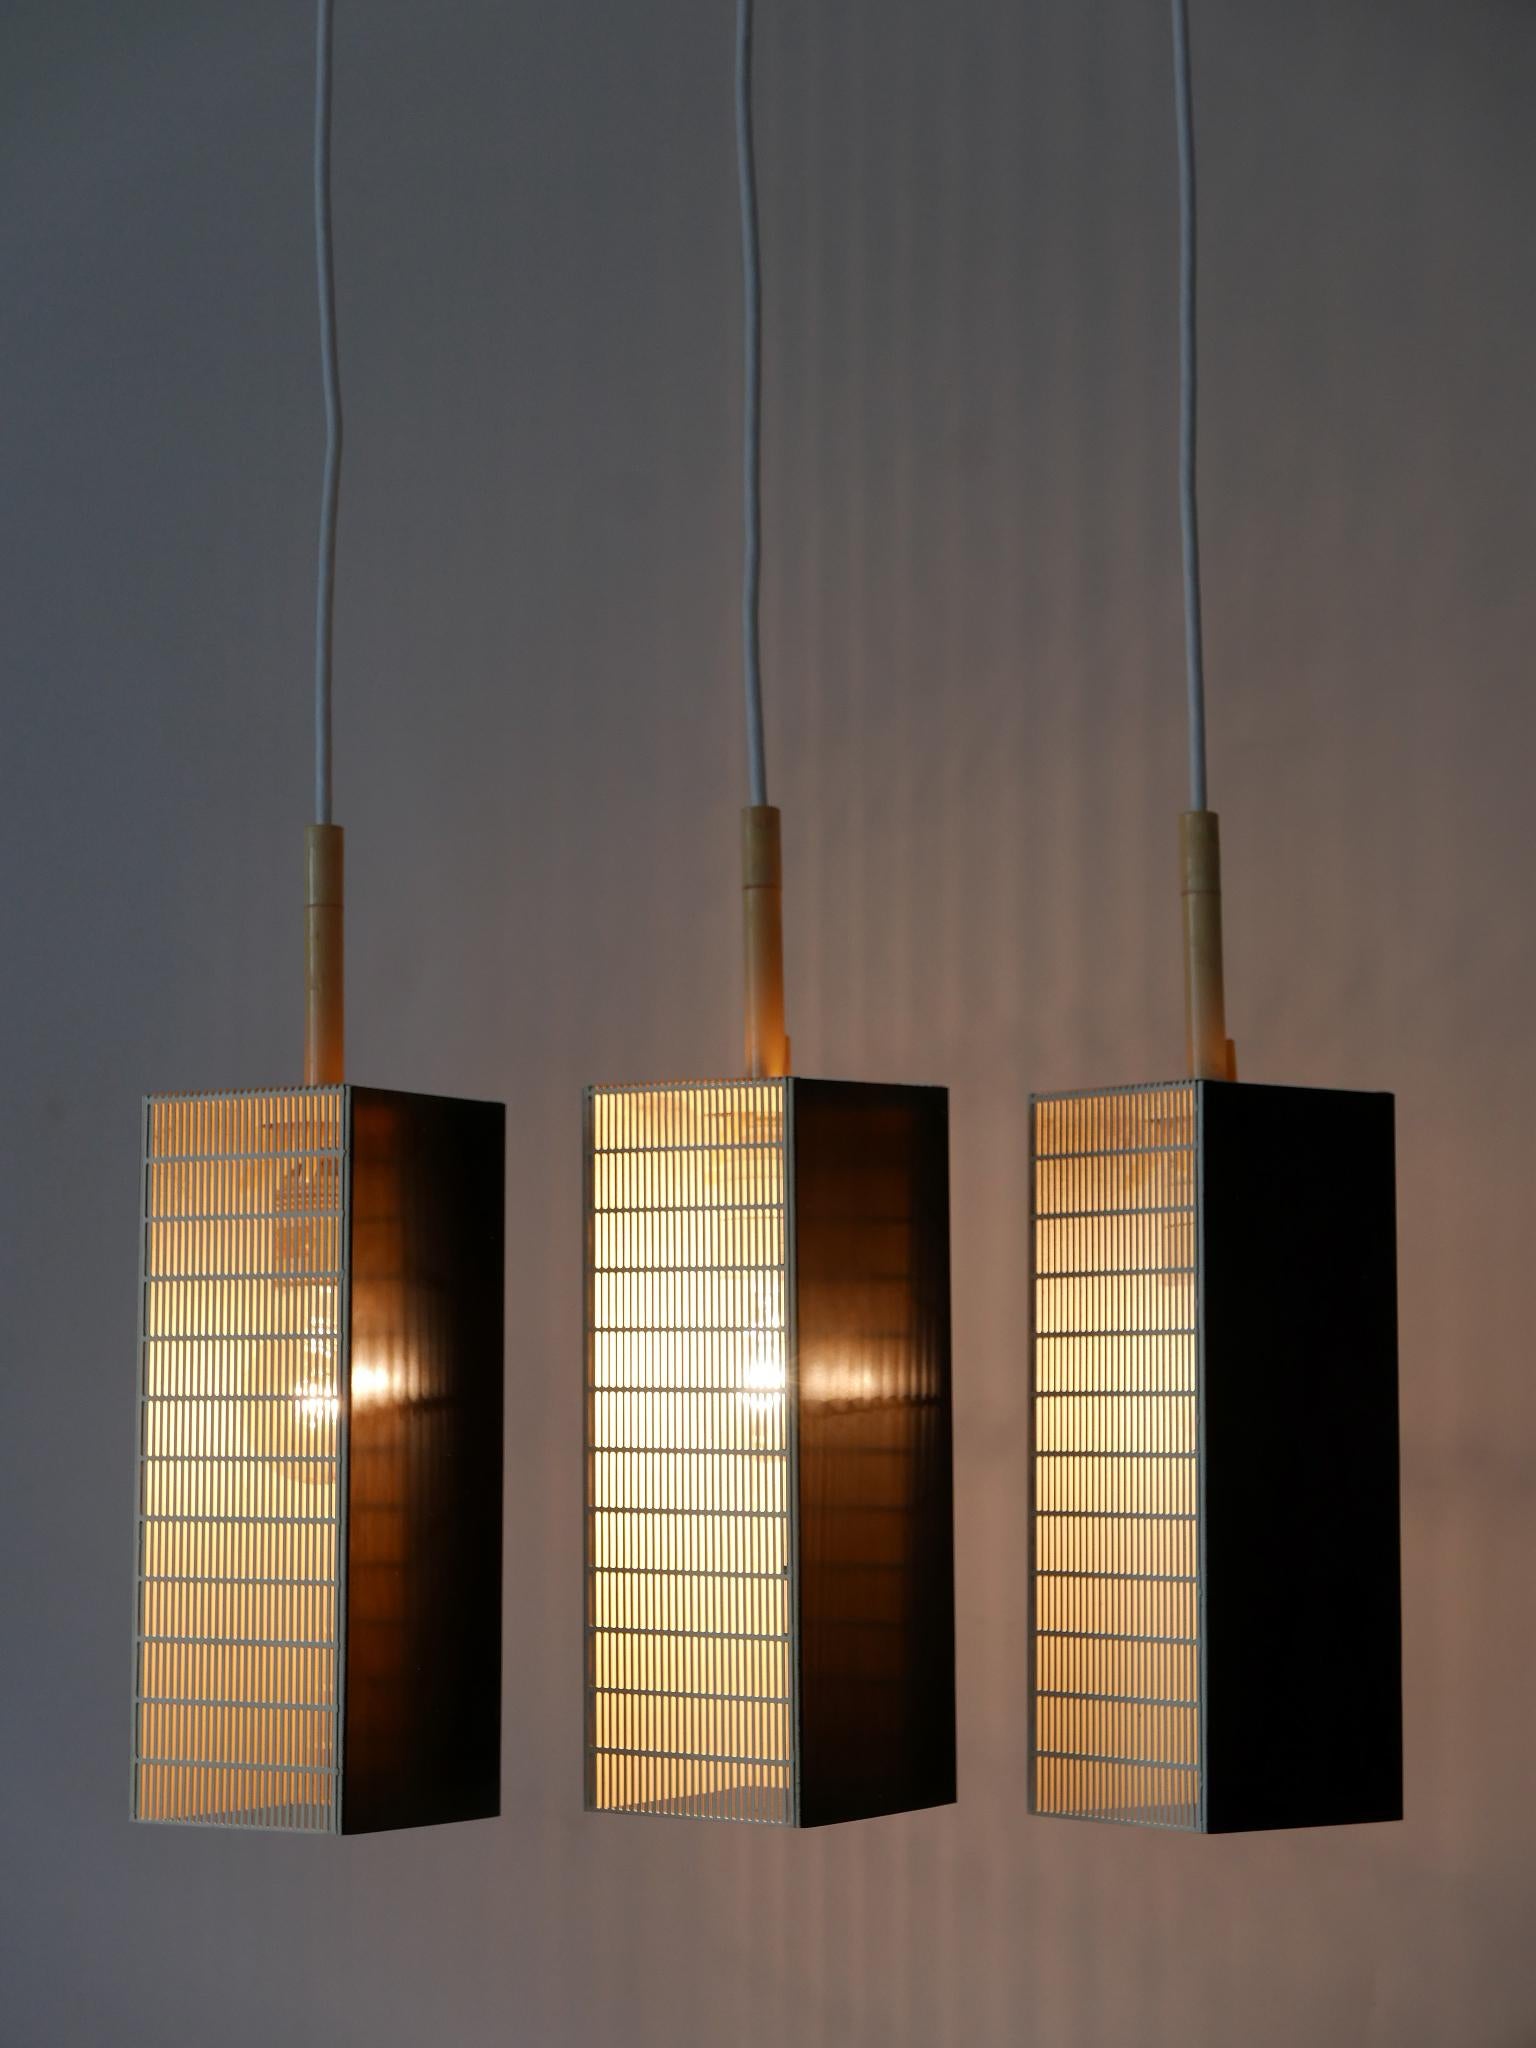 Set of three rare, lovely and elegant Mid-Century Modern pendant lamps or hanging lights. Manufactured by Staff Leuchten, Germany, 1960s.

Executed in white and black enameled and perforated metal, each pendant lamp is executed with 1 x E27 / E26